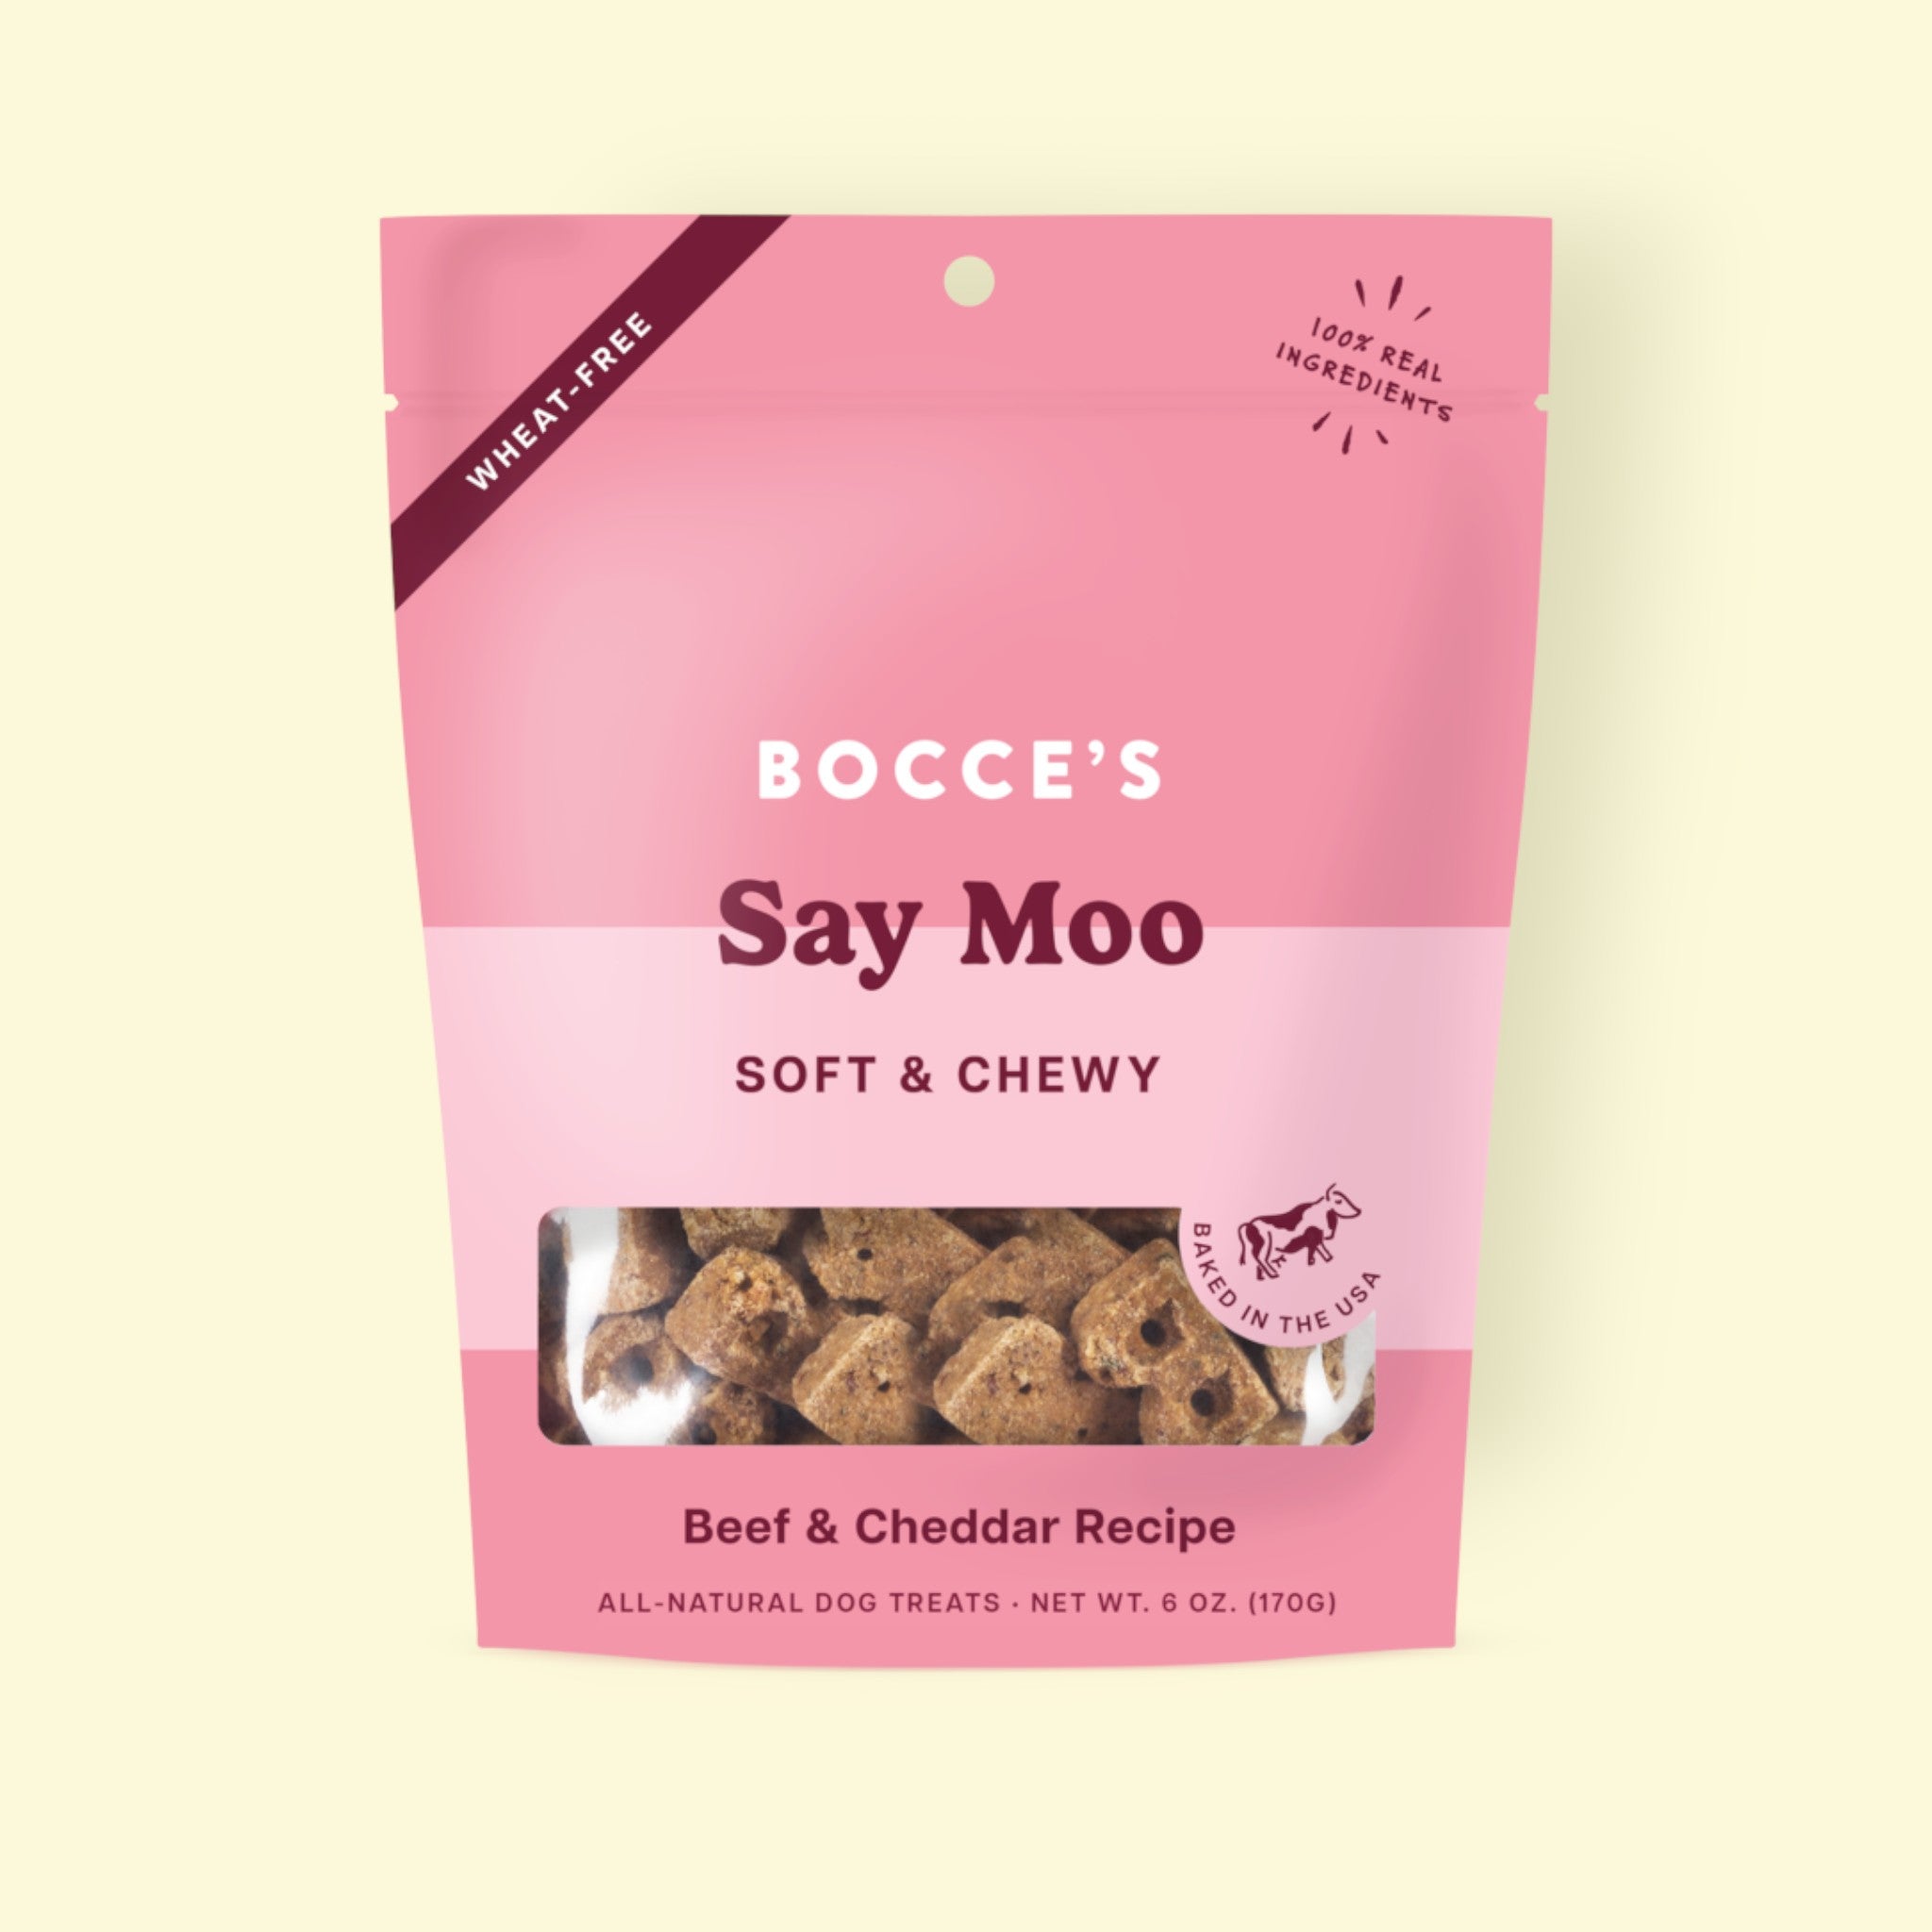 Bocce's Say Moo Soft & Chewy 6oz (170g)